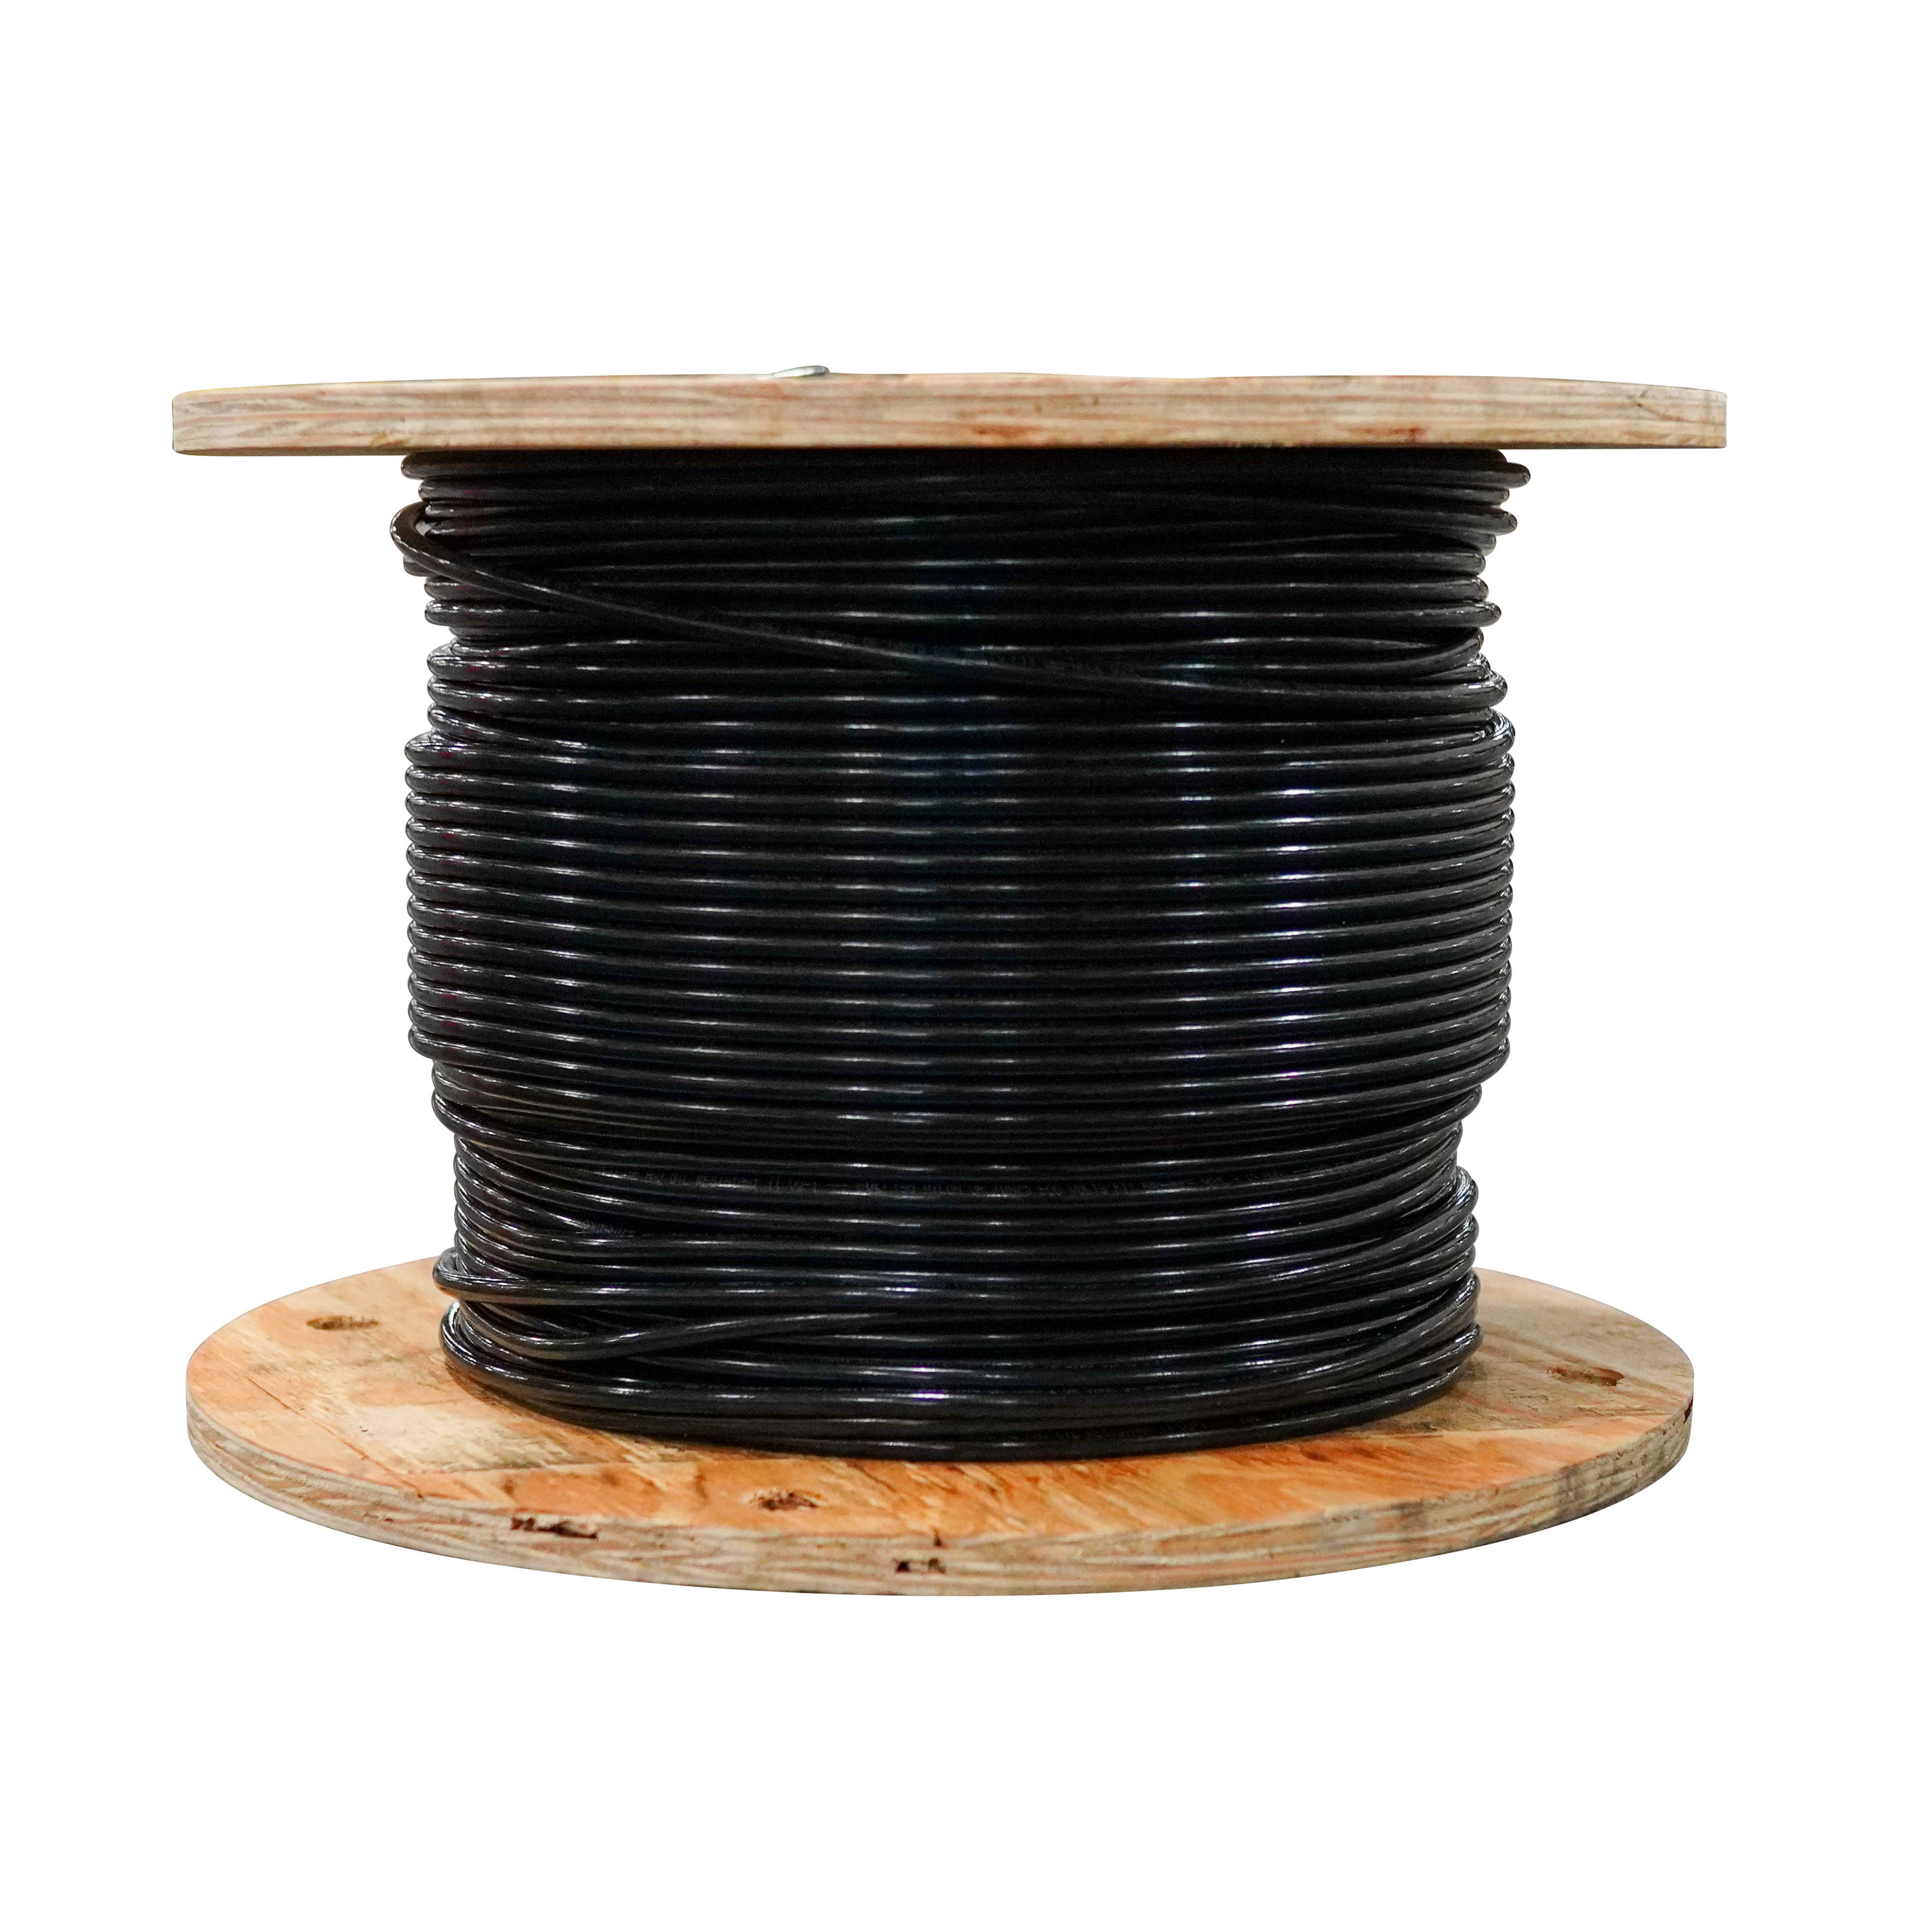 24 Gauge Bare Copper Wire with Oil Coated Solid Copper Wire for